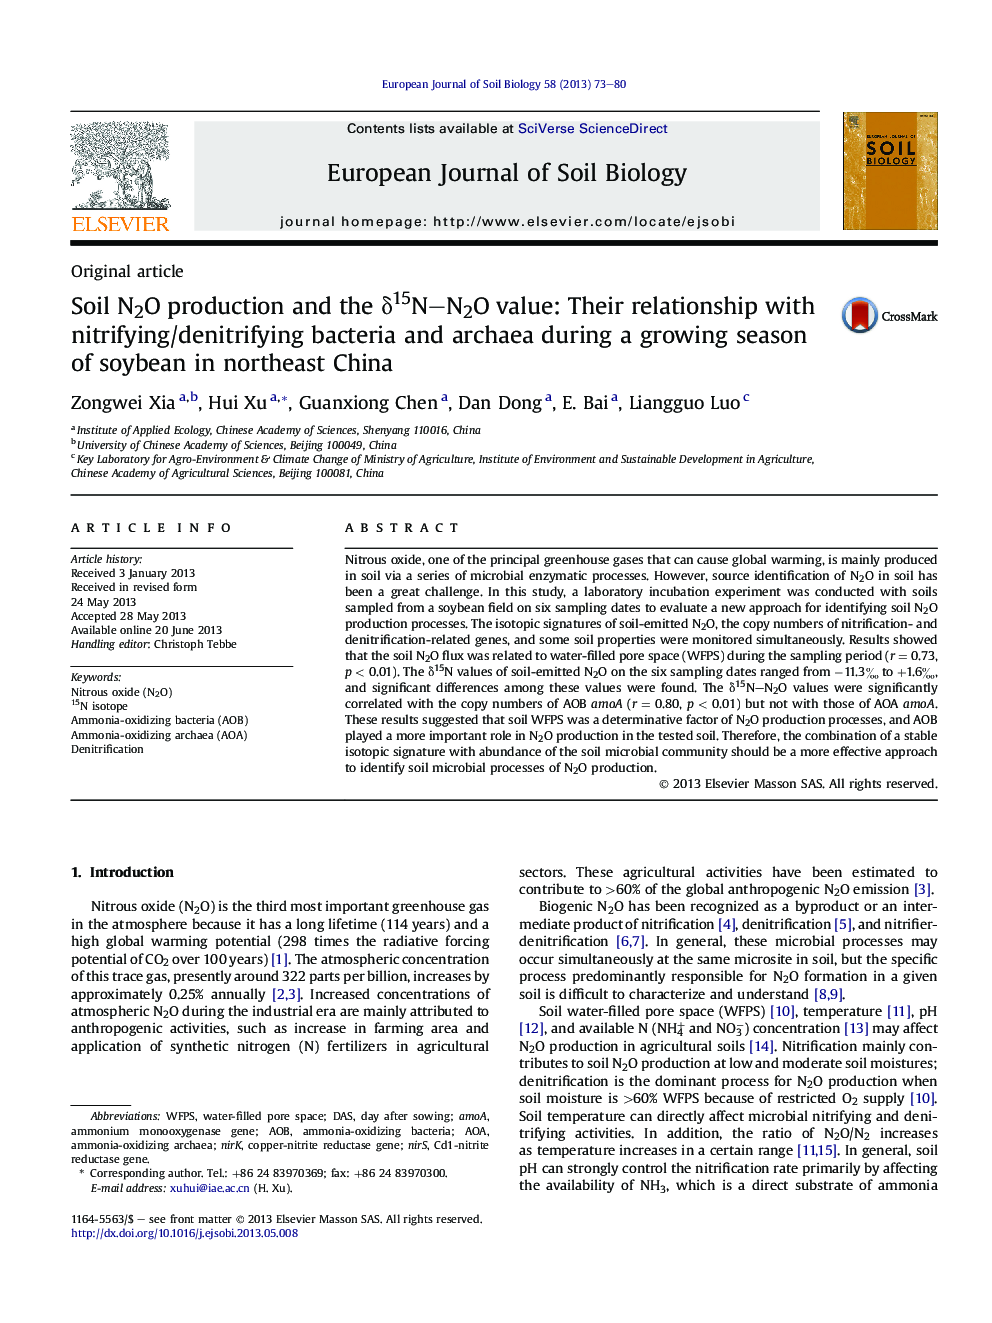 Soil N2O production and the δ15N–N2O value: Their relationship with nitrifying/denitrifying bacteria and archaea during a growing season of soybean in northeast China